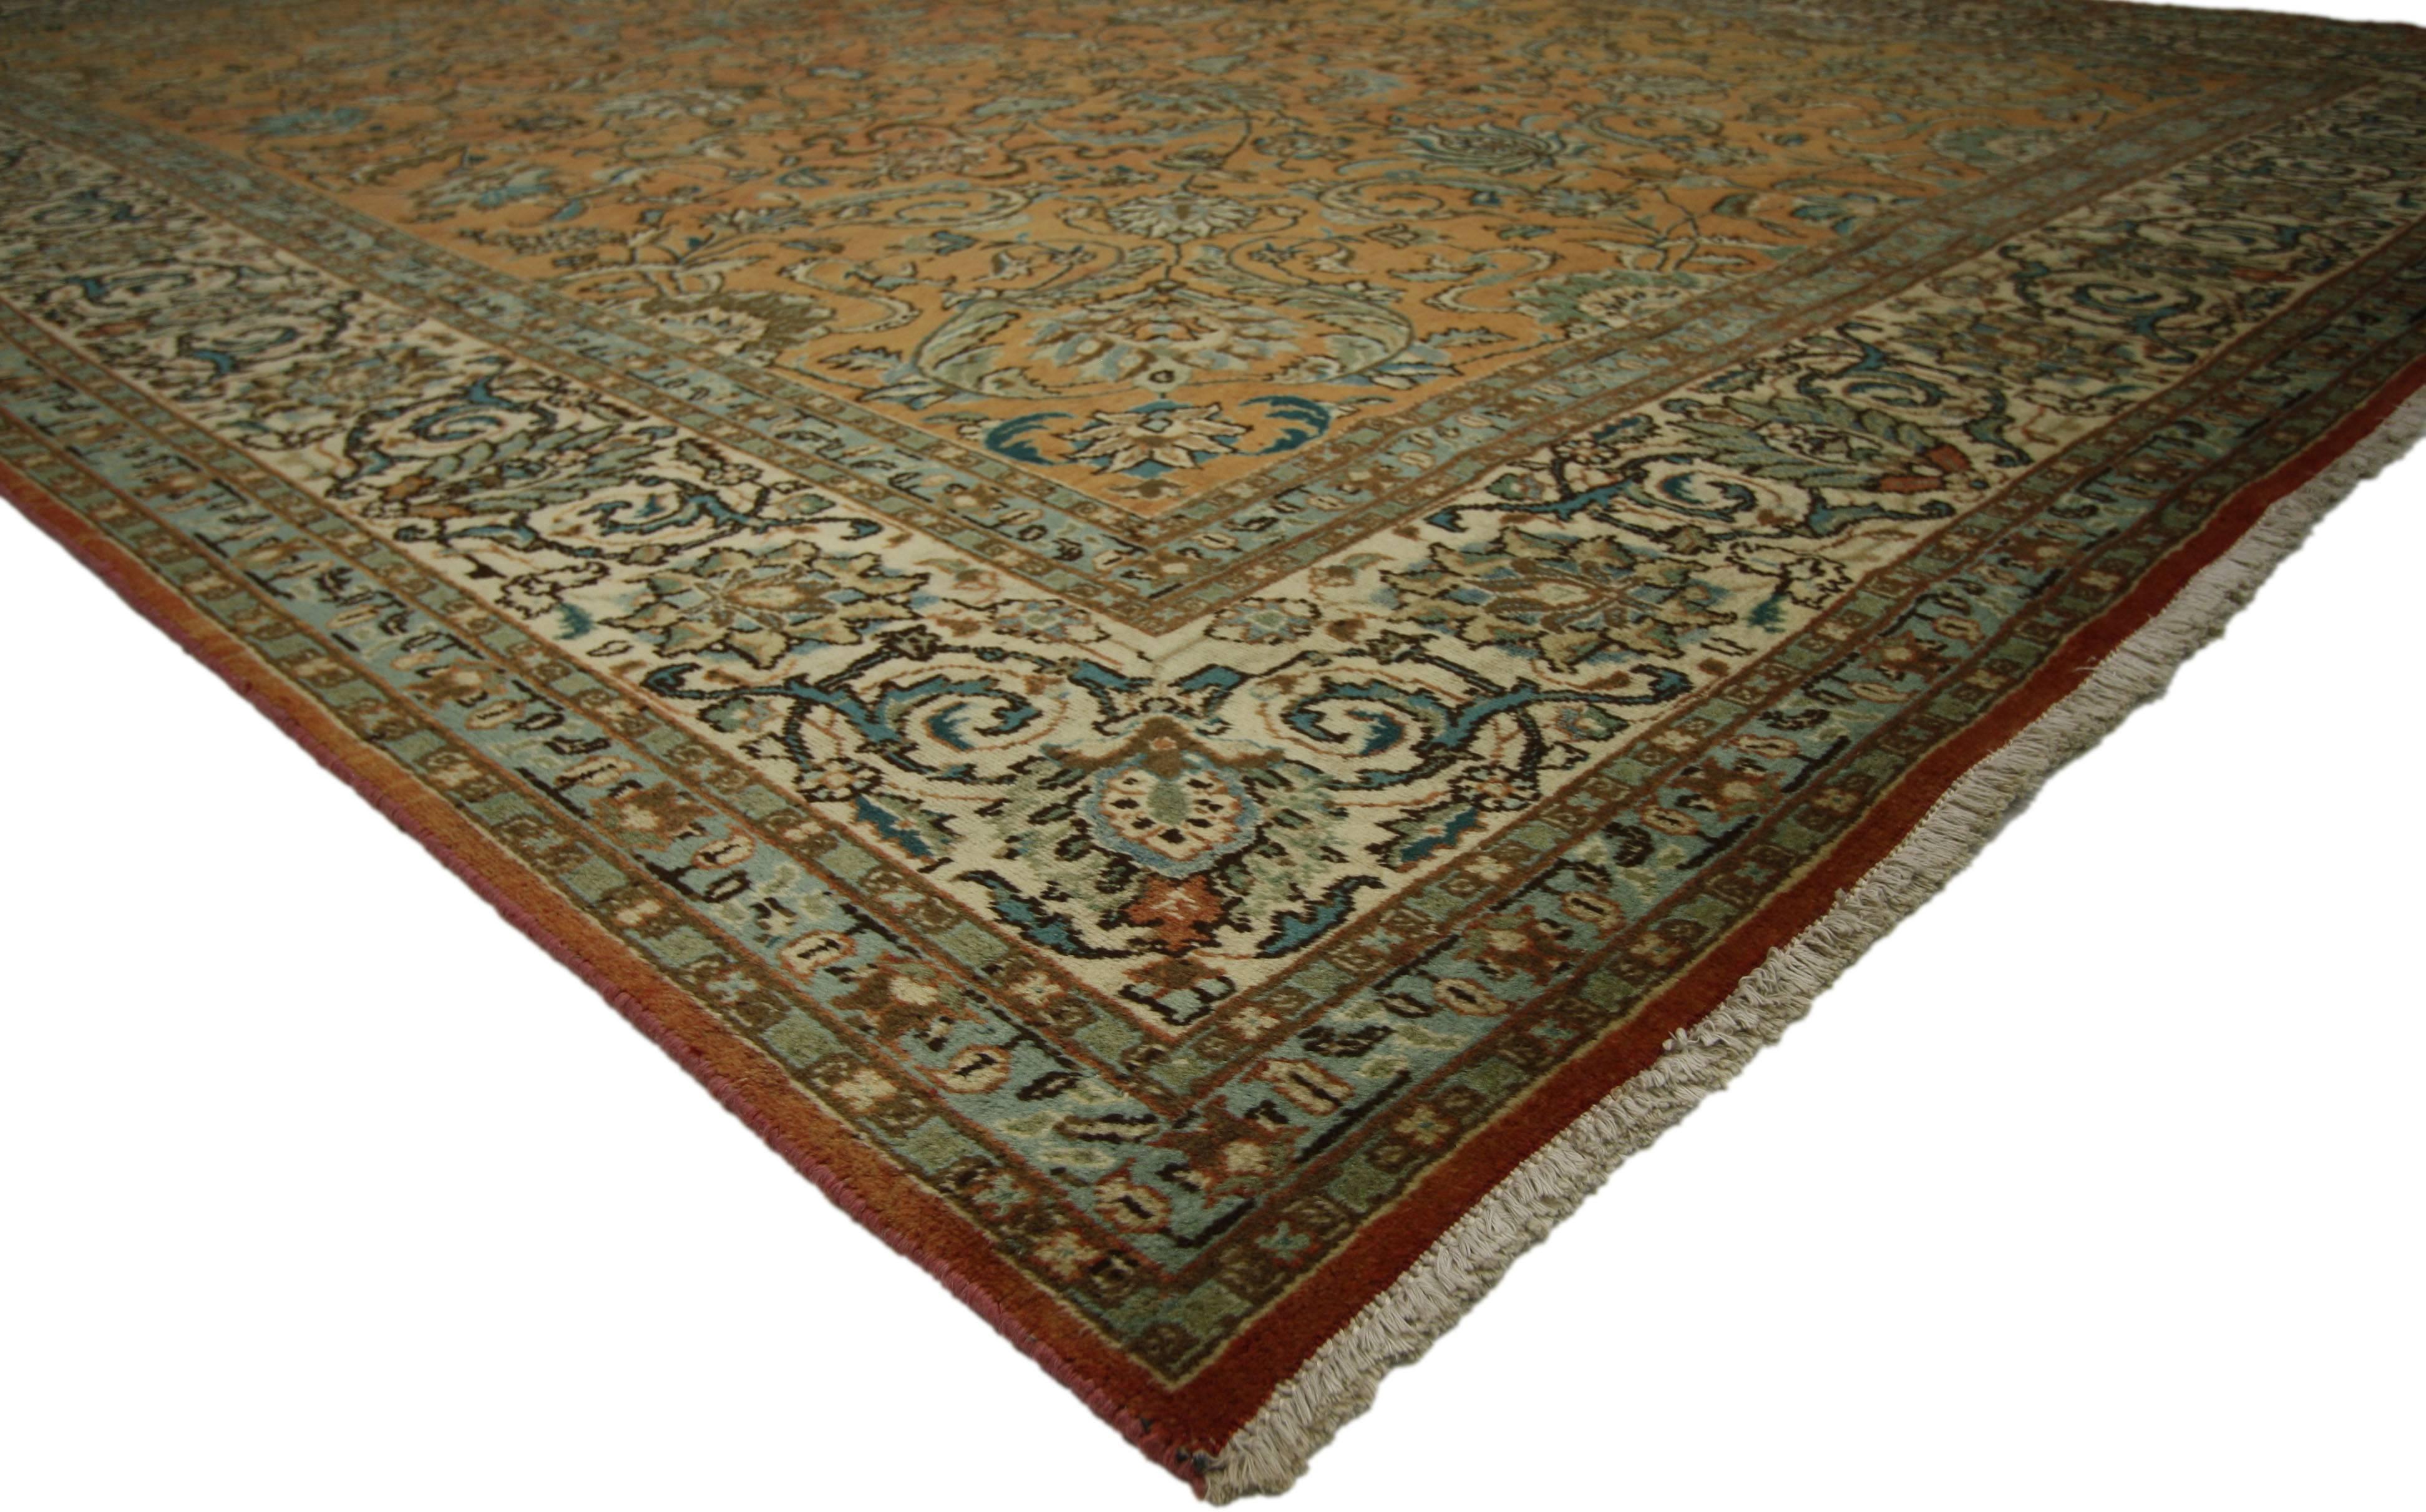 75612 Vintage Persian Tabriz rug with traditional style 10'00 x 13'03. This hand-knotted wool vintage Persian Tabriz rug features an all-over pattern surrounded by a classic border creating a well-balanced and timeless design. This vintage Persian